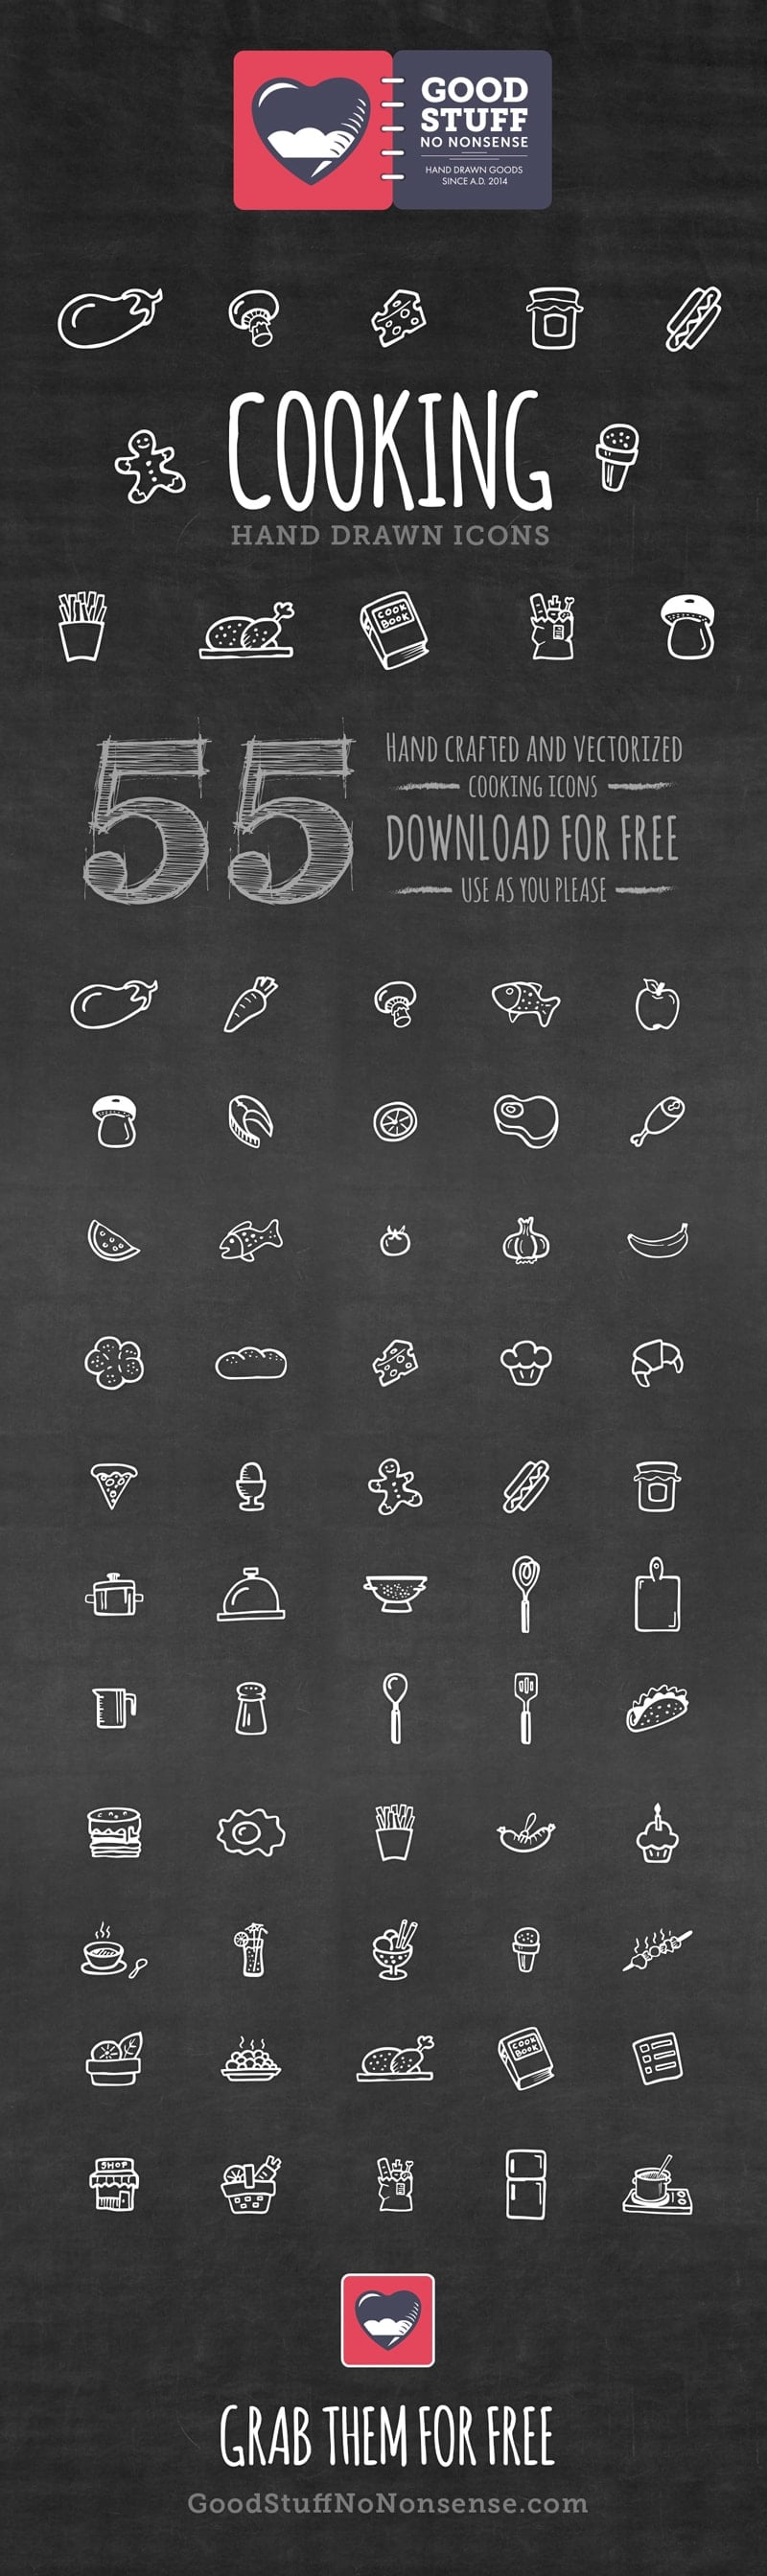 Free Cooking Icons - Hand Drawn Icons